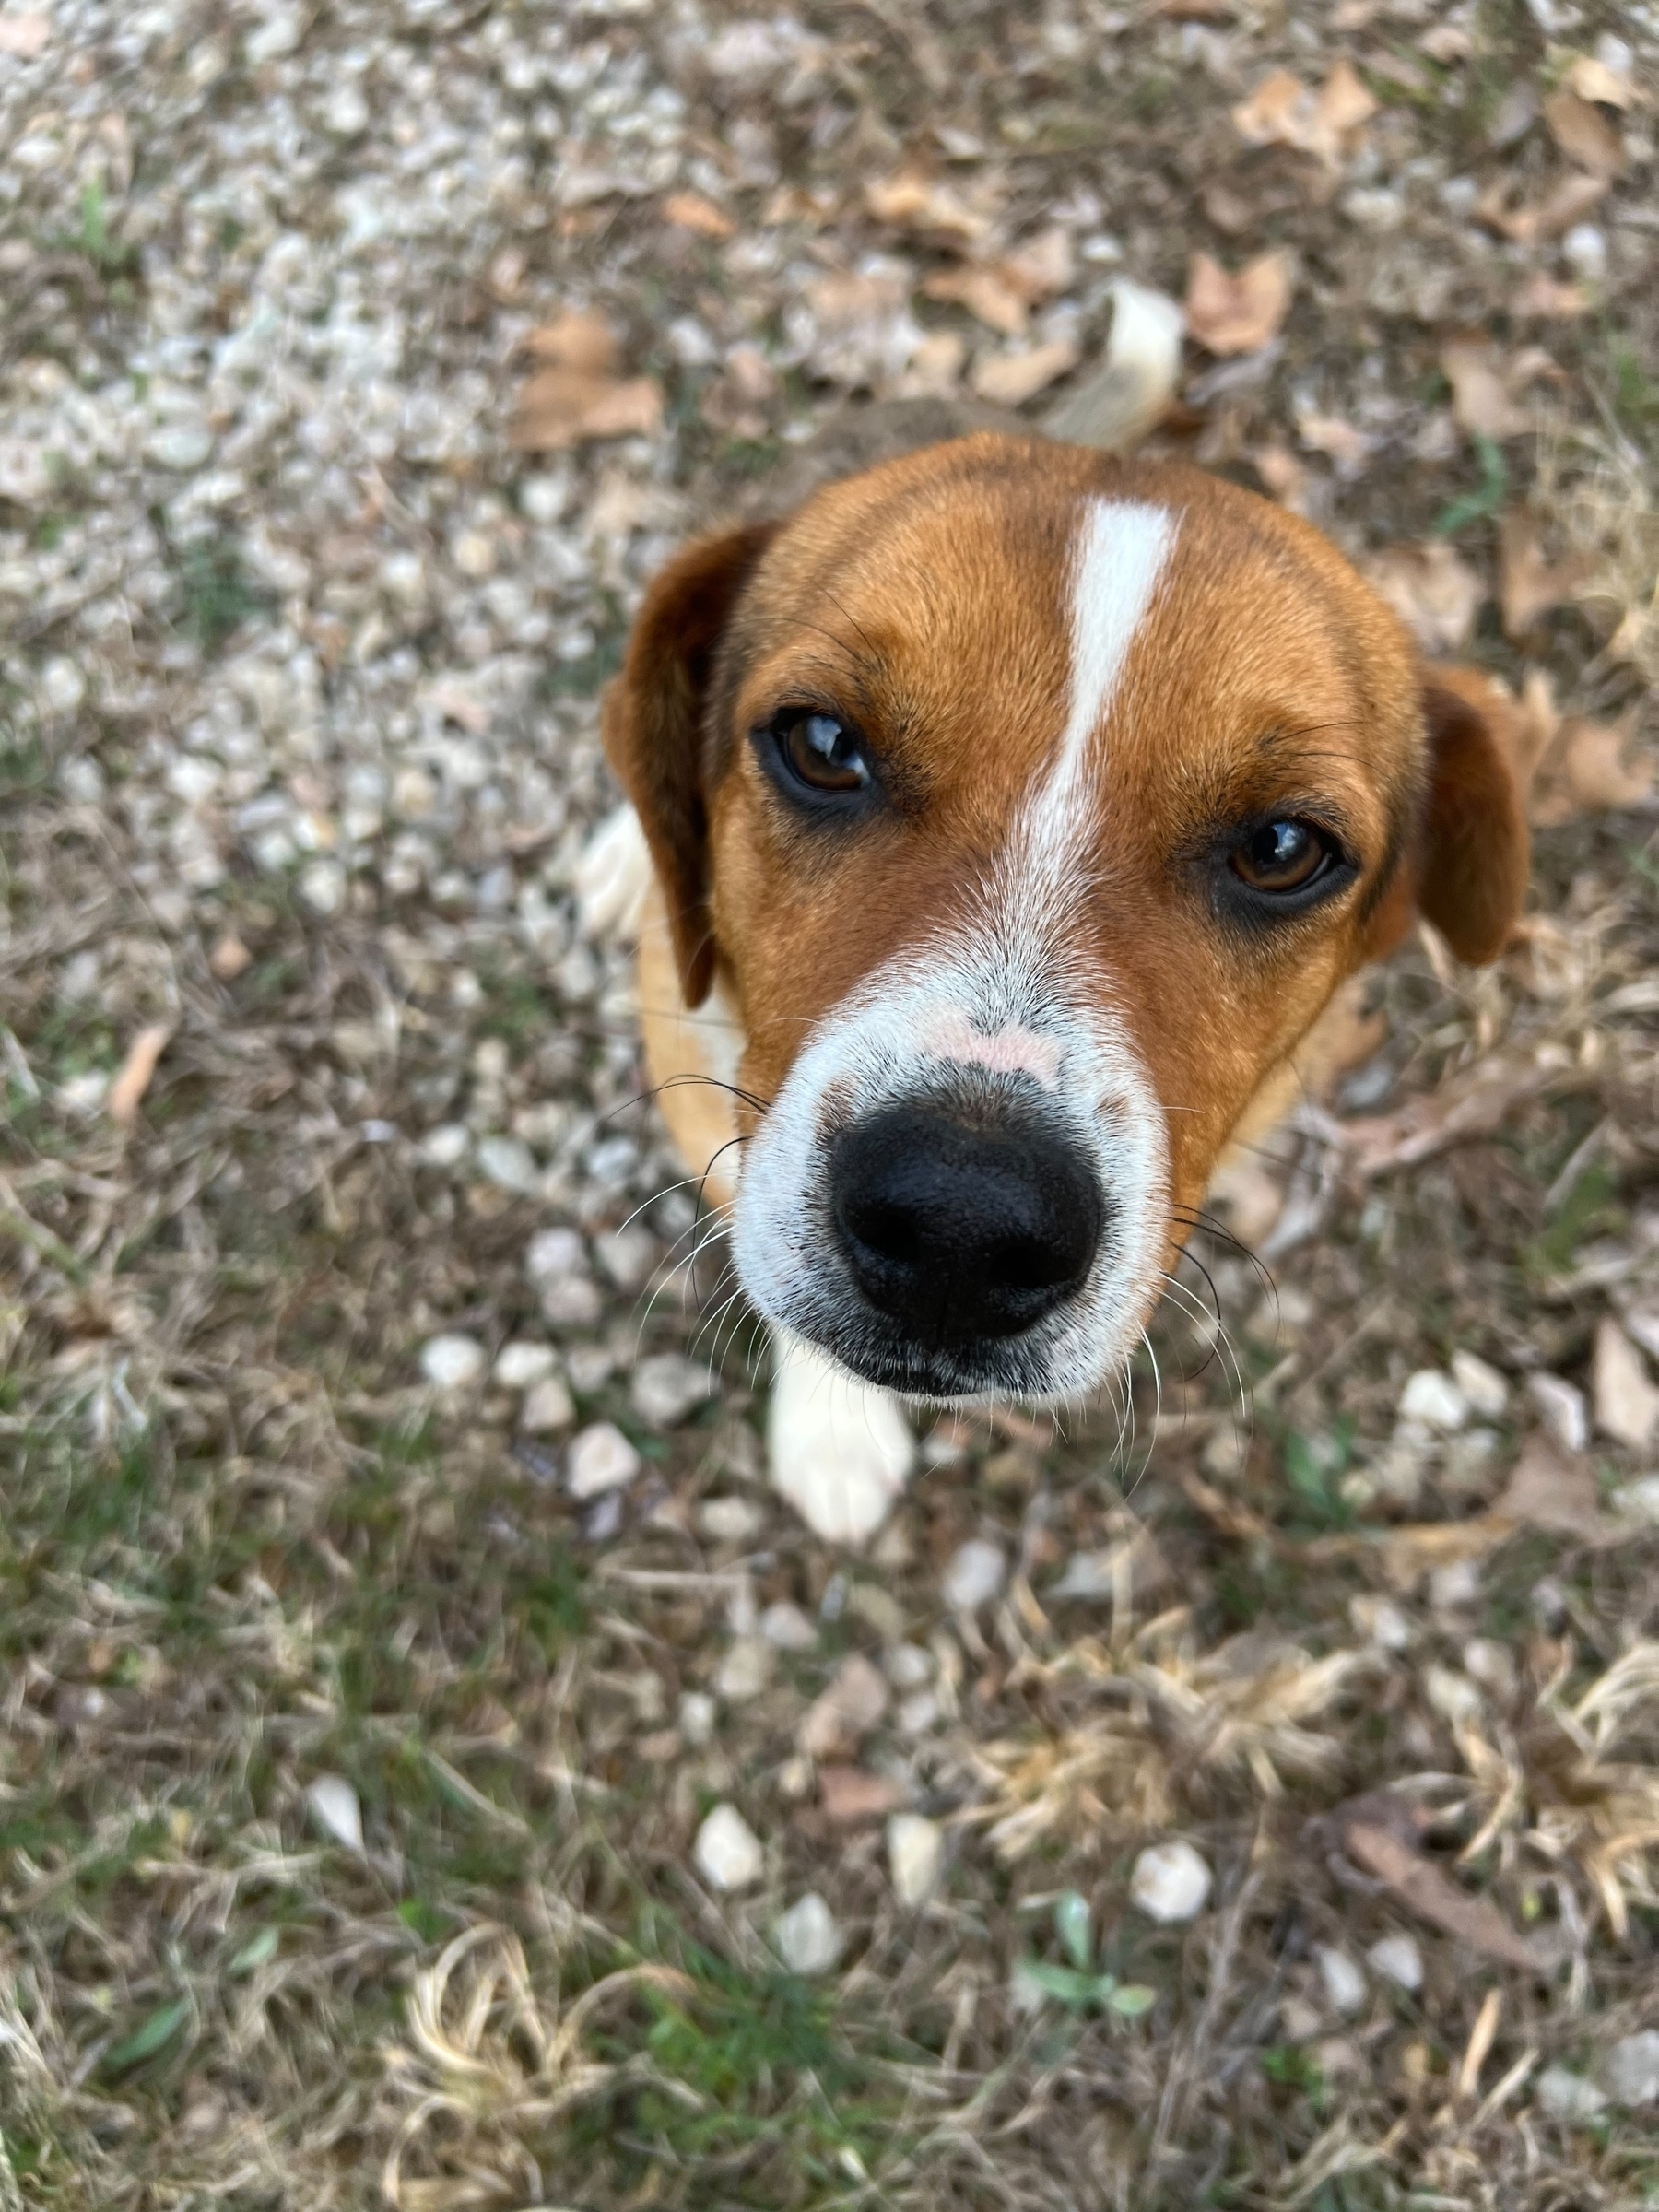 A beagle looks up at a camera. His face is brown and white and he seems friendly.